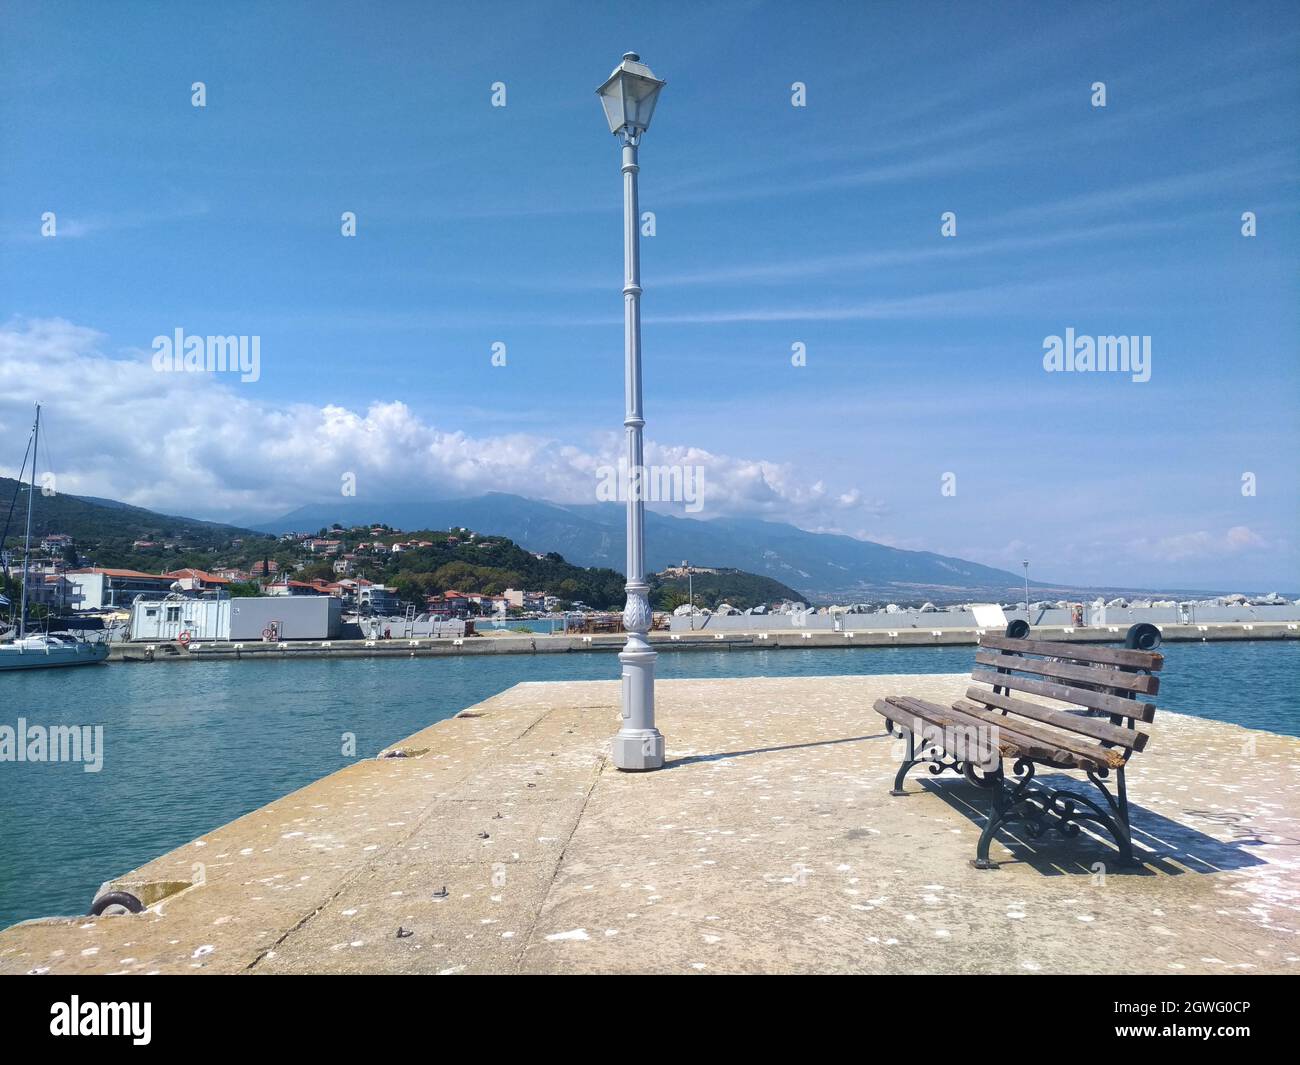 Single Bench In Port With The Sea In Background Stock Photo